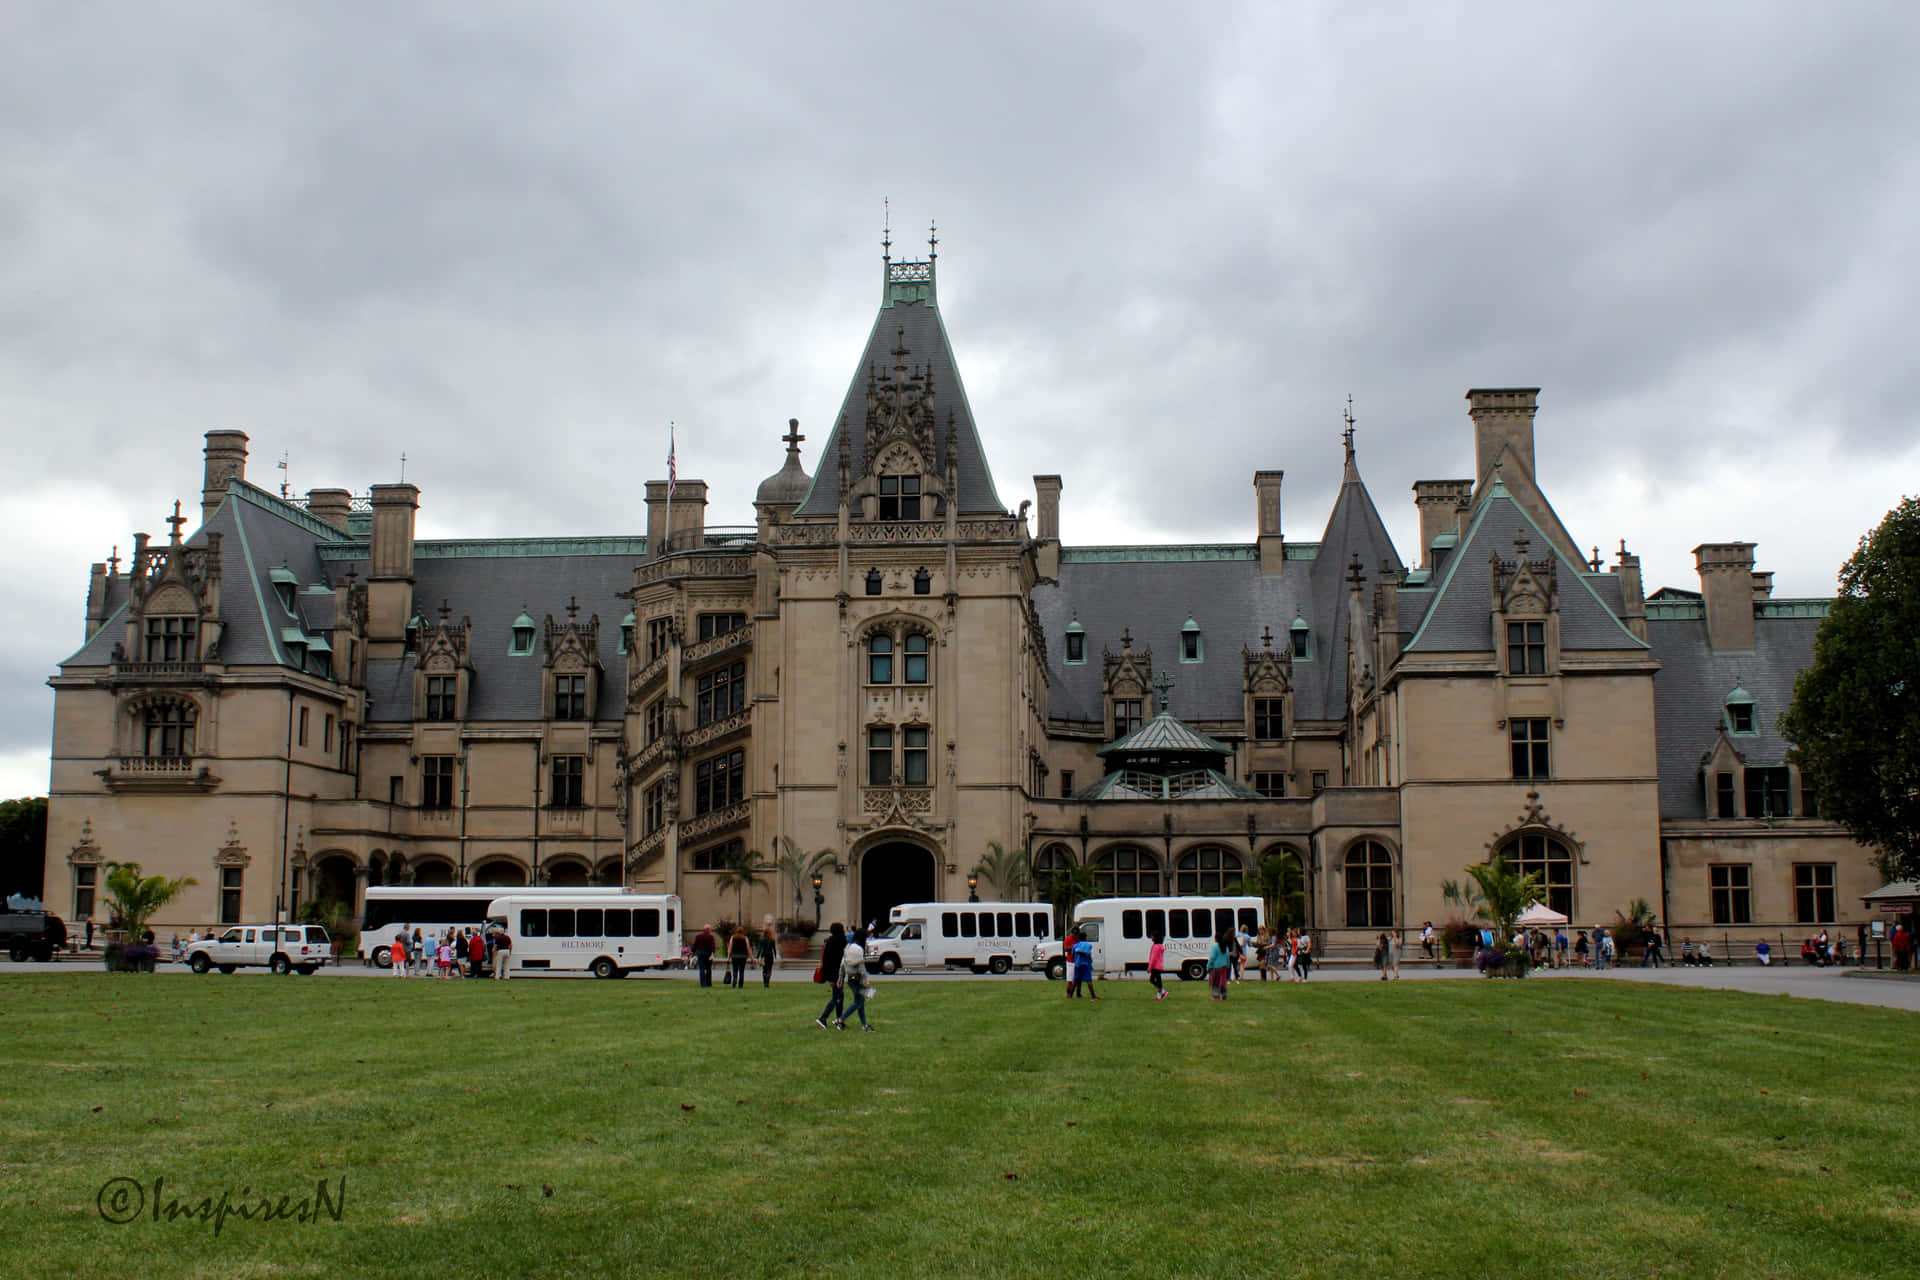 Be mesmerised by the breathtaking beauty of the Biltmore Estate